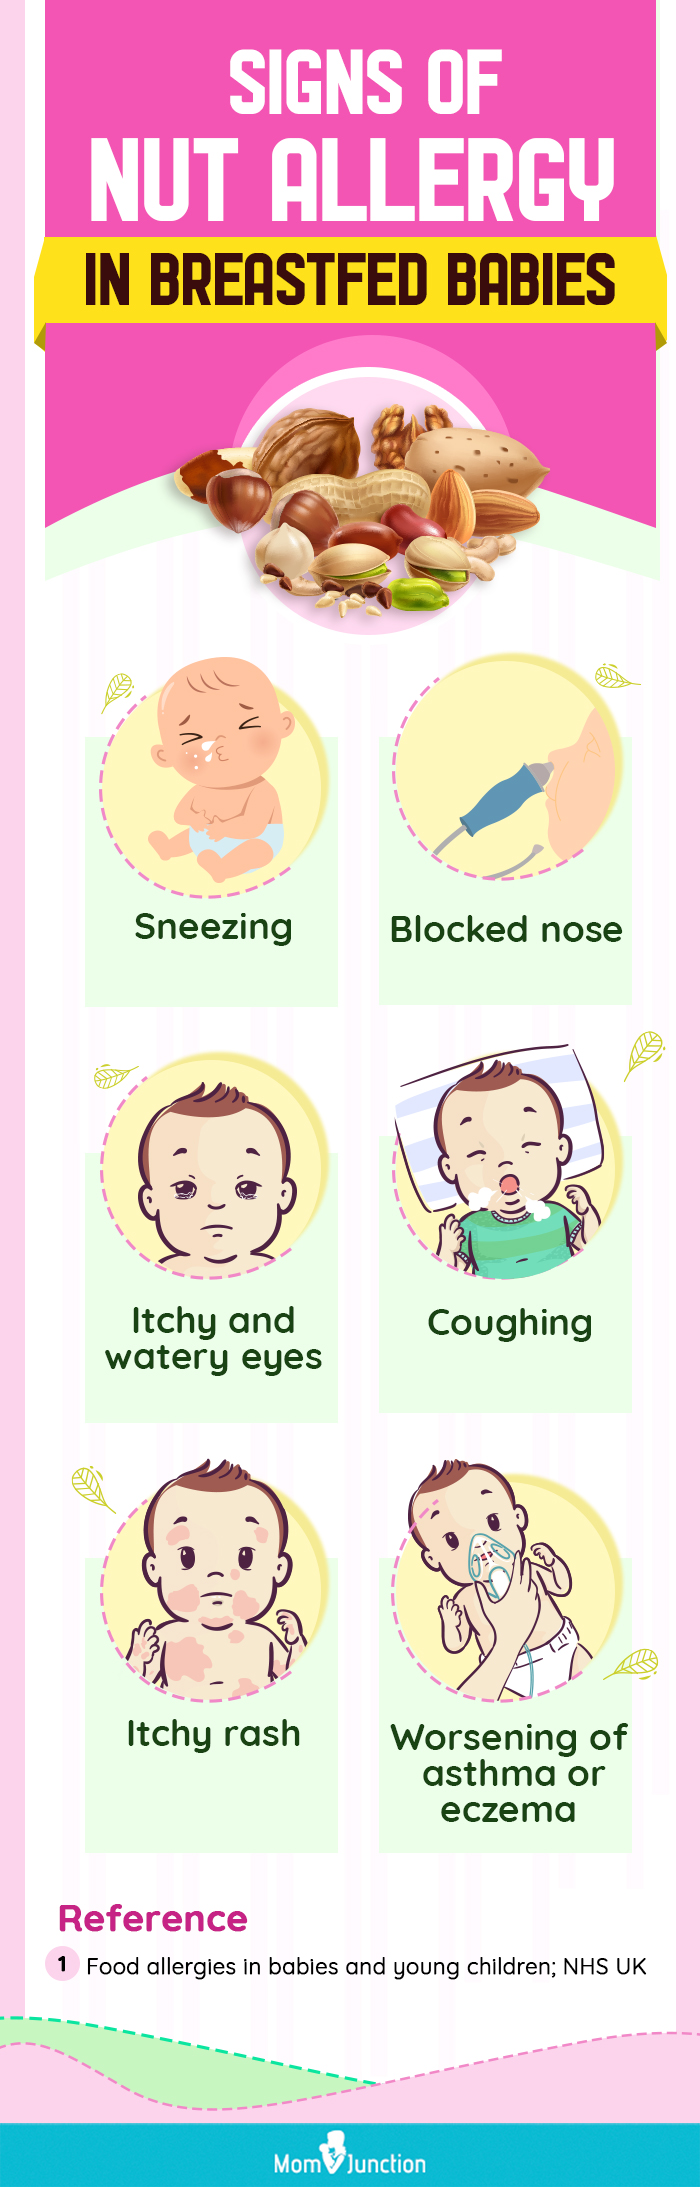 signs of nut allergy in breastfed babies (infographic)